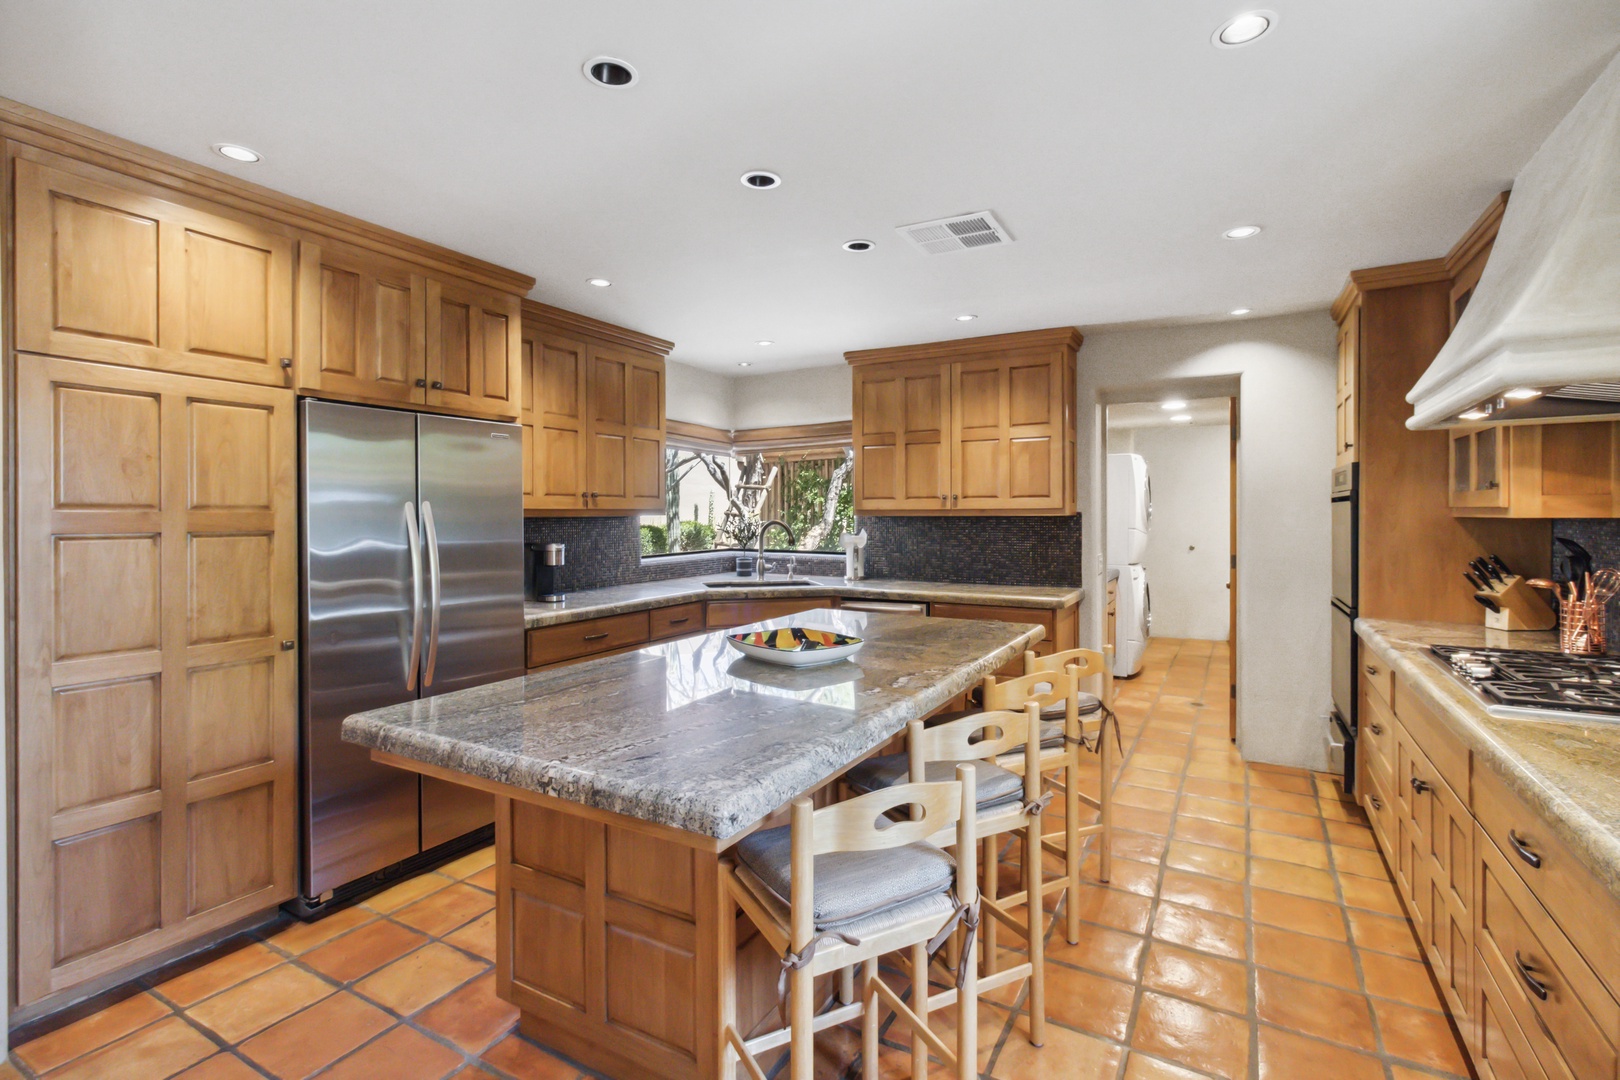 Scottsdale Vacation Rentals, Boulders Hideaway Villa - Chef's kitchen ready to prep your favorite meal!